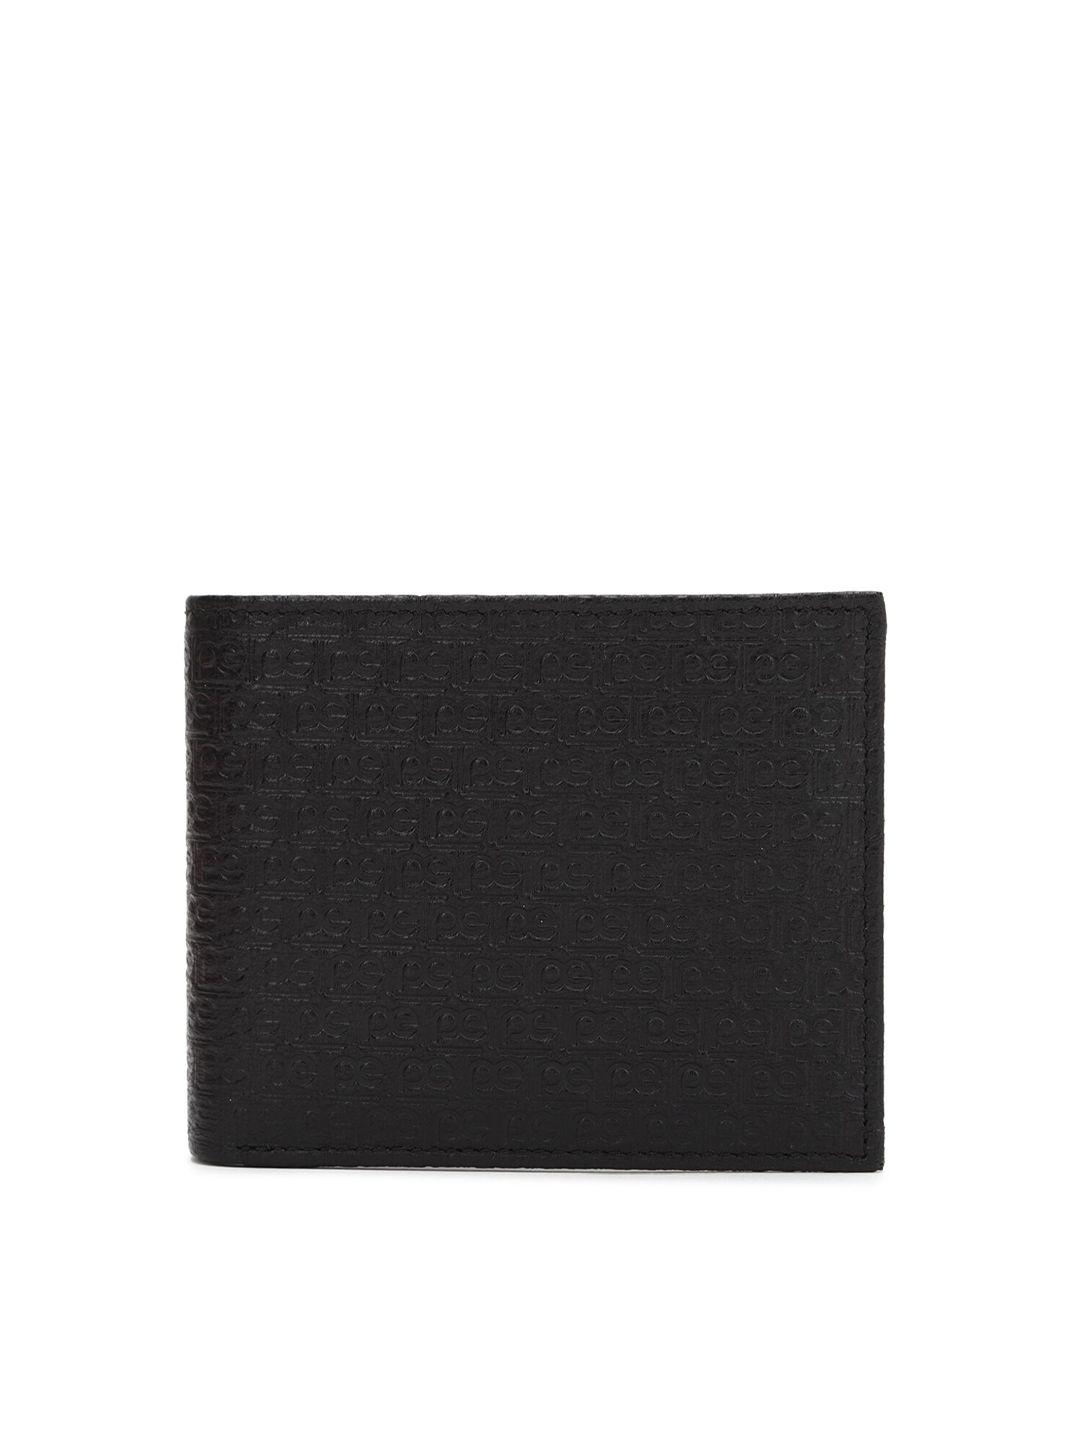 peter-england-men-black-textured-leather-two-fold-wallet